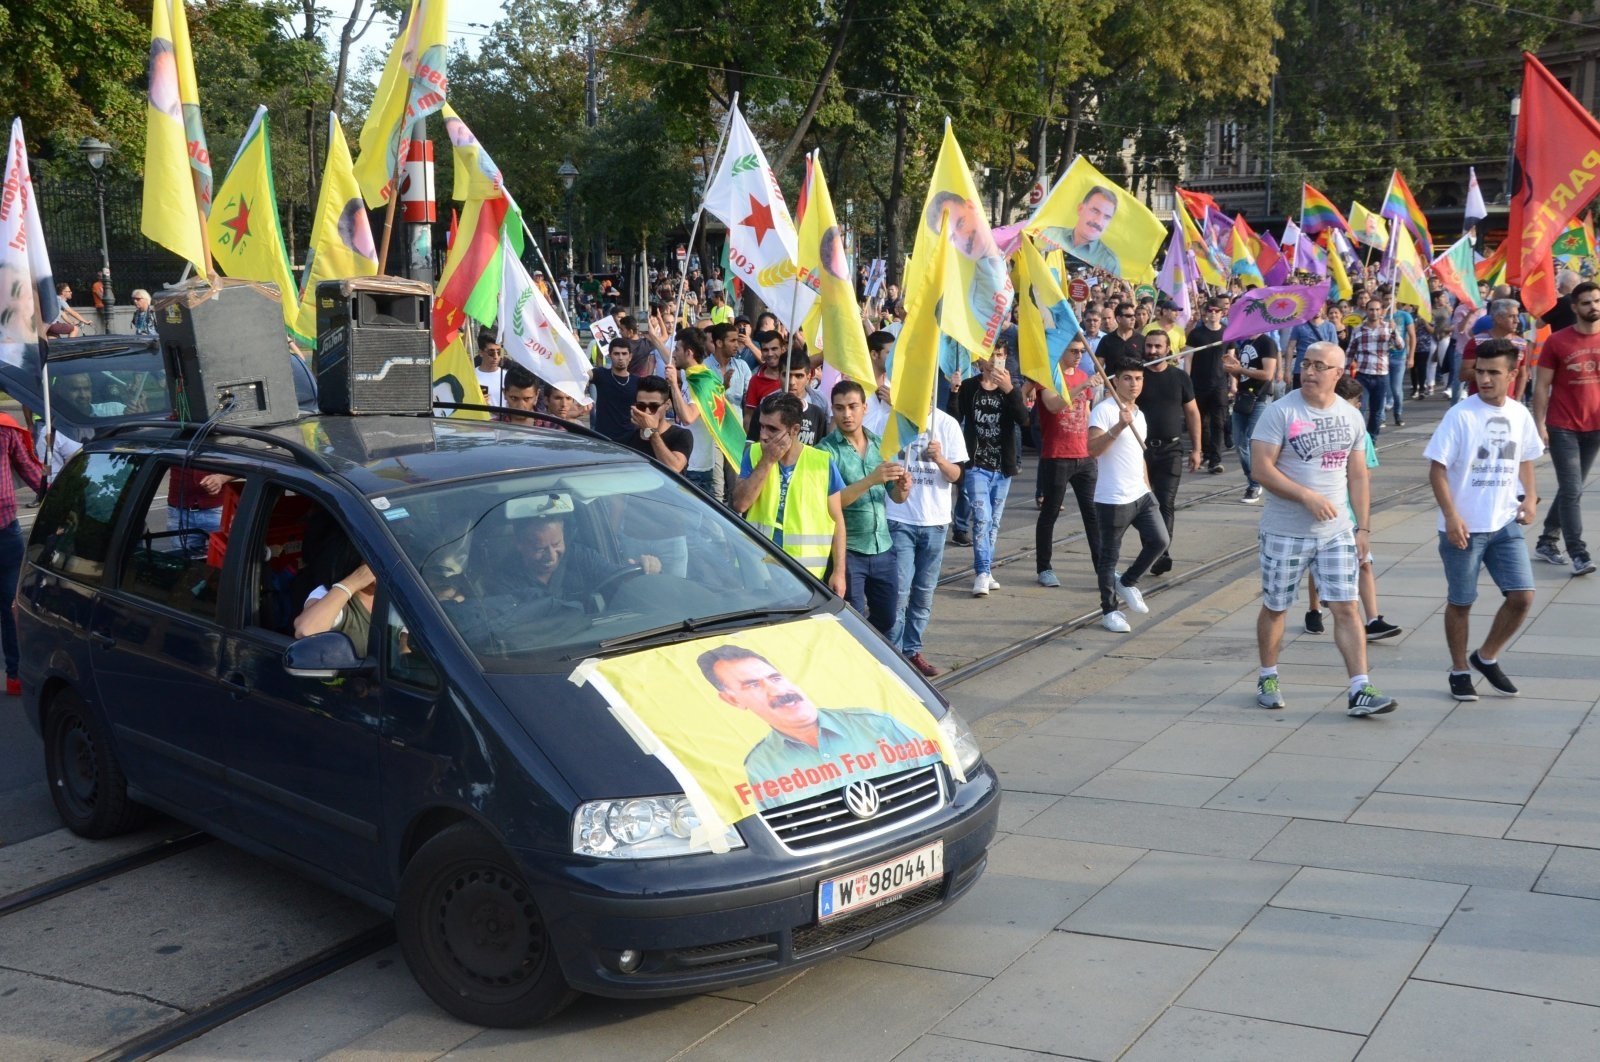 Pro-PKK protesters wave flags of the terrorist organization and a picture of imprisoned terrorist leader Abdullah Öcalan is seen on a vehicle in the Austrian capital Vienna, June 28, 2020. (AA Photo)